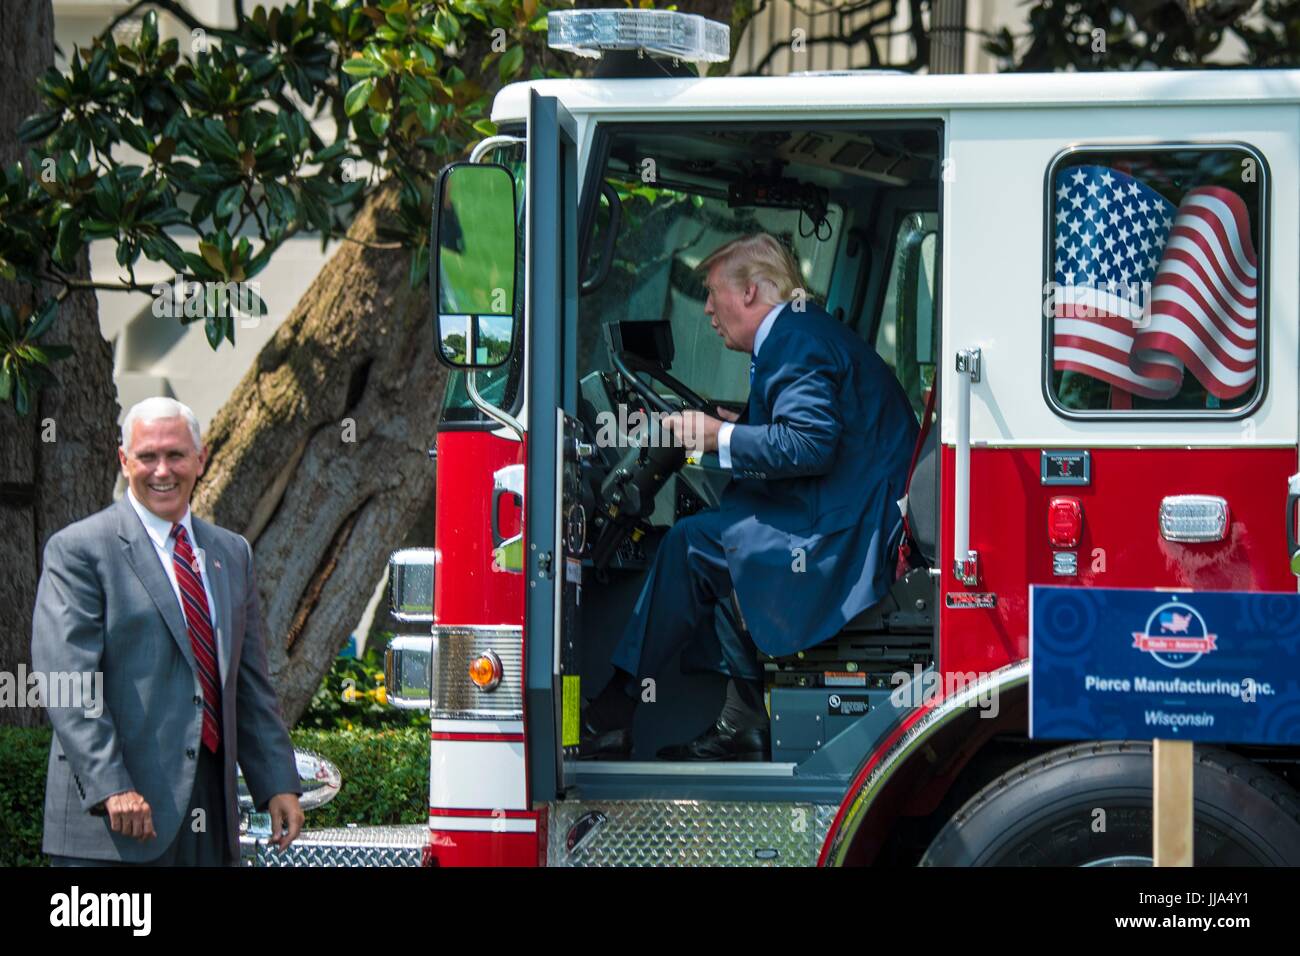 Washington, United States Of America. 17th July, 2017. U.S President Donald Trump sits behind the wheel of a Pierce fire truck as Vice President Mike Pence looks on during the Made in America Product Showcase on the South Lawn of the White House July 17, 2017 in Washington, DC. Credit: Planetpix/Alamy Live News Stock Photo